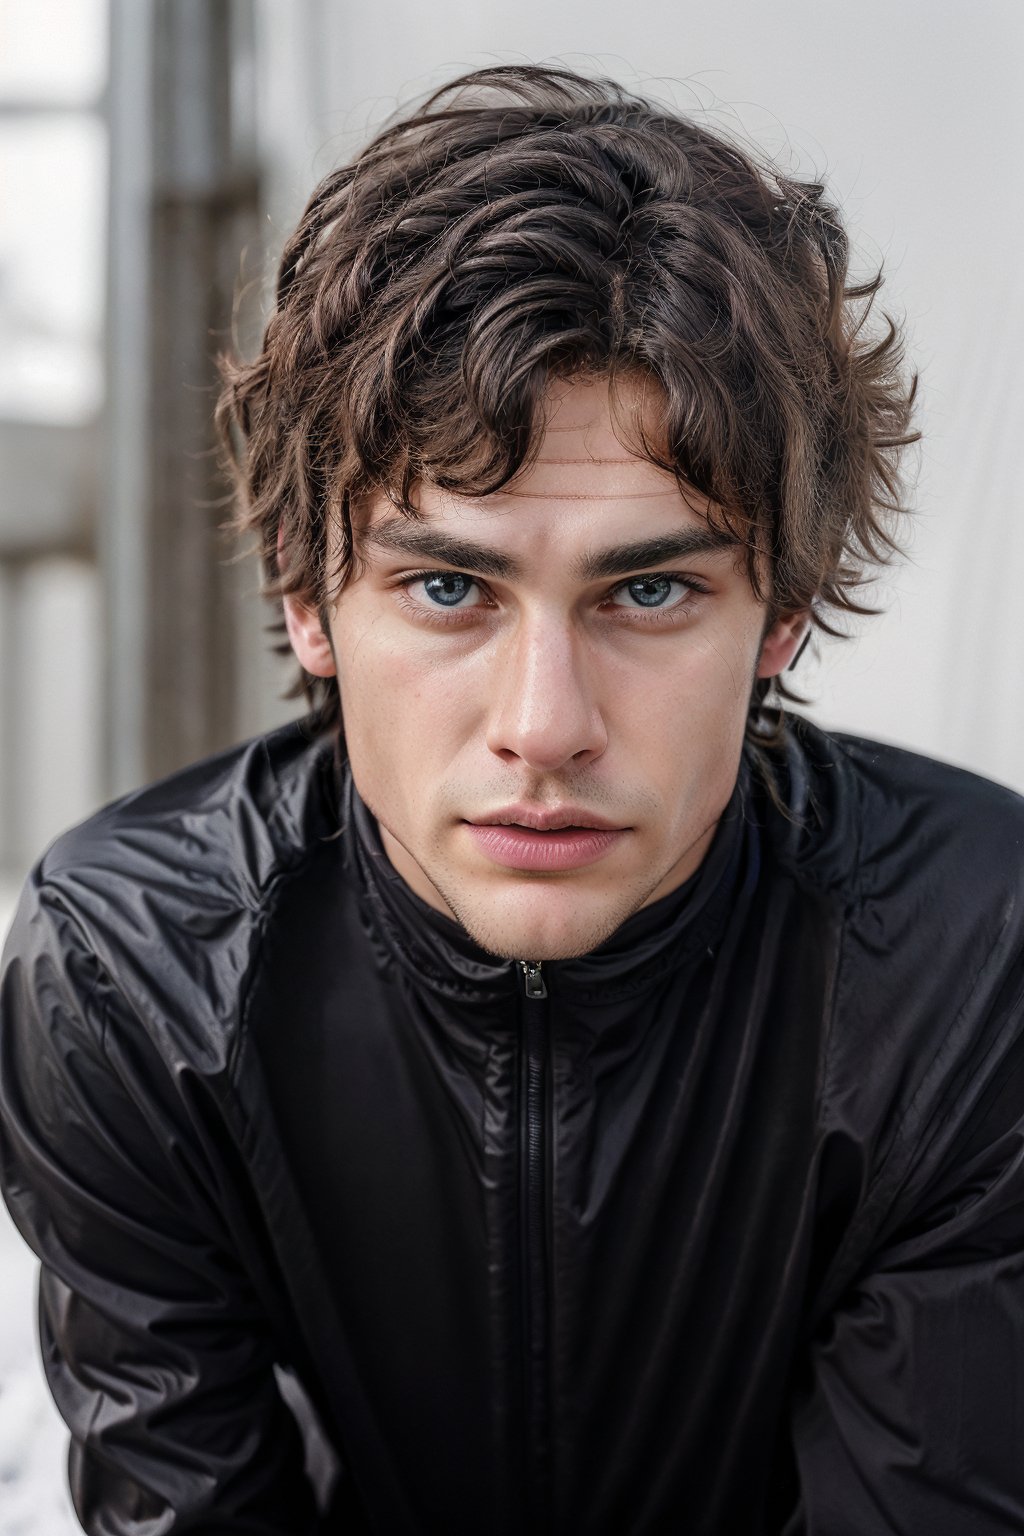 hyperrealistic image of a Caucasian man with an athletic appearance, dressed in a modern, high-tech cyclist suit. The suit should be designed with the distinctive colors of the UCI (Union Cycliste Internationale). The character should have detailed skin texture, well-defined hands, and hazel-colored eyes that reflect realism. His face should display symmetry in his physical features, and he should have a serious yet friendly expression. The scene's lighting should be natural and realistic, with a medium shot that shows the character centered in the frame, looking directly at the viewer. Additionally, ensure that his entire body is oriented towards the viewer to create a sense of connection.
(Change Biker Suit Color: 1.2)